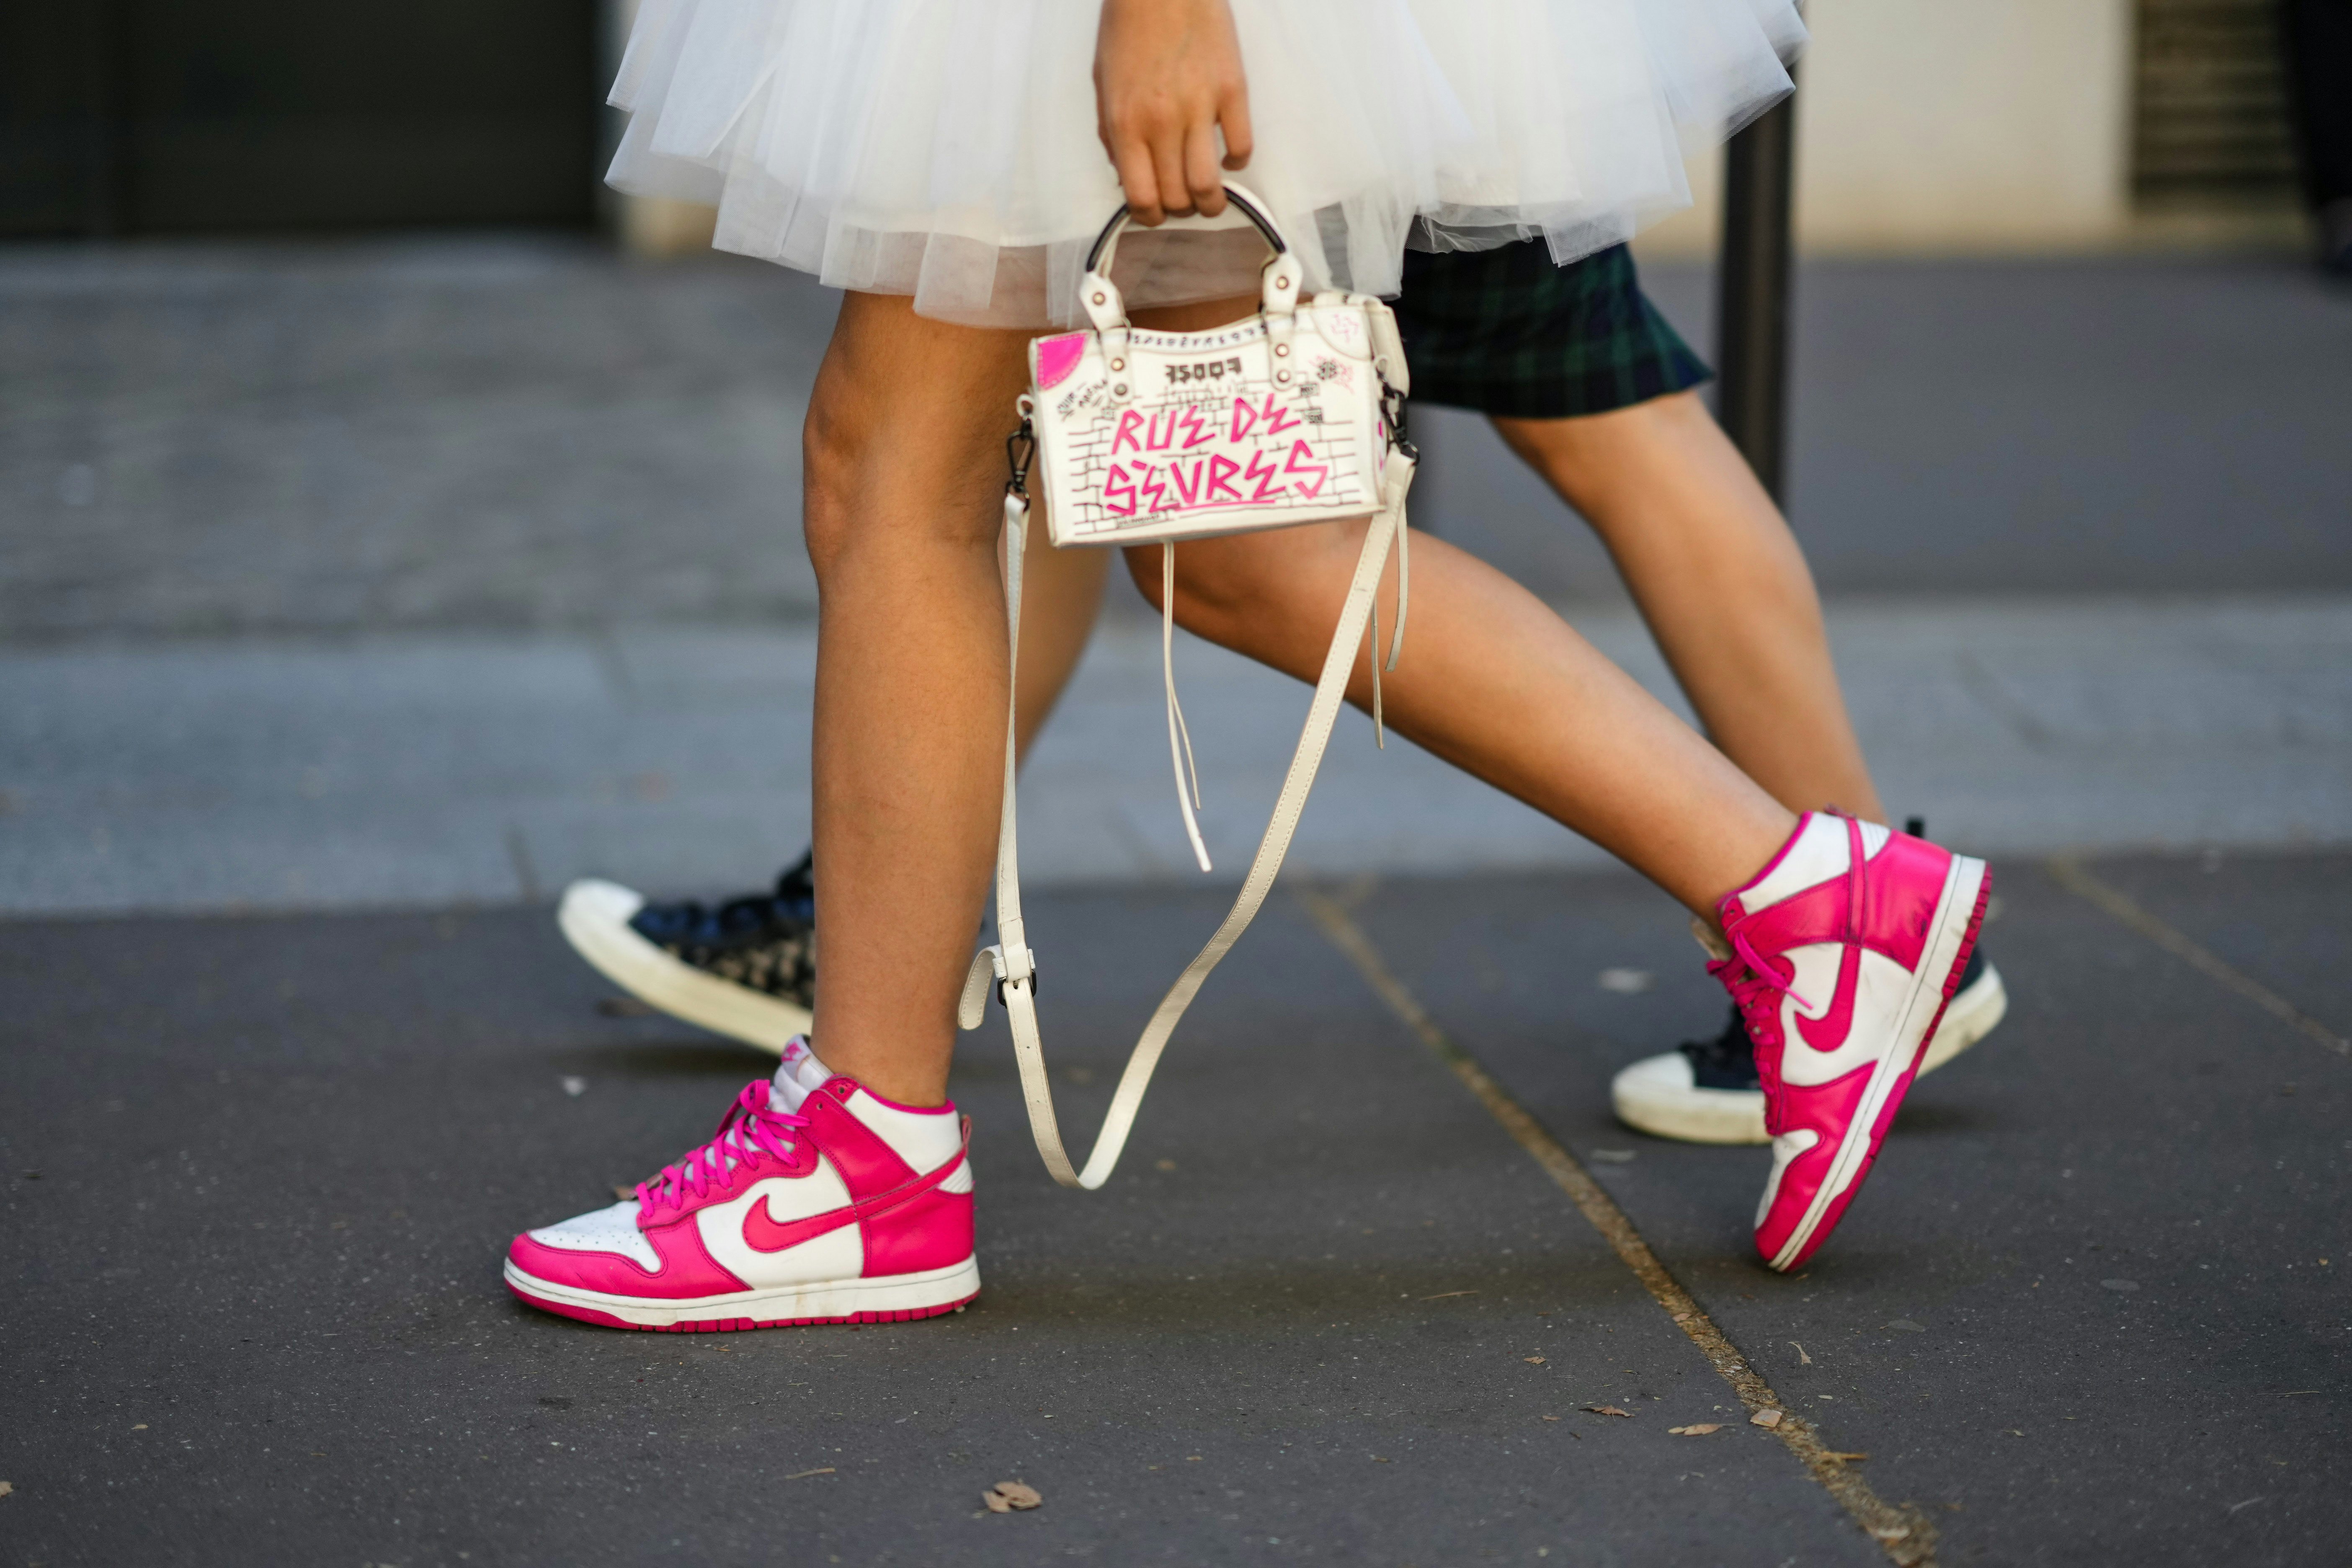 THIS DUNK IS ON TREND! HYPER PINK Nike Dunk Low On Foot Review and How to  Style with 3 Outfits 